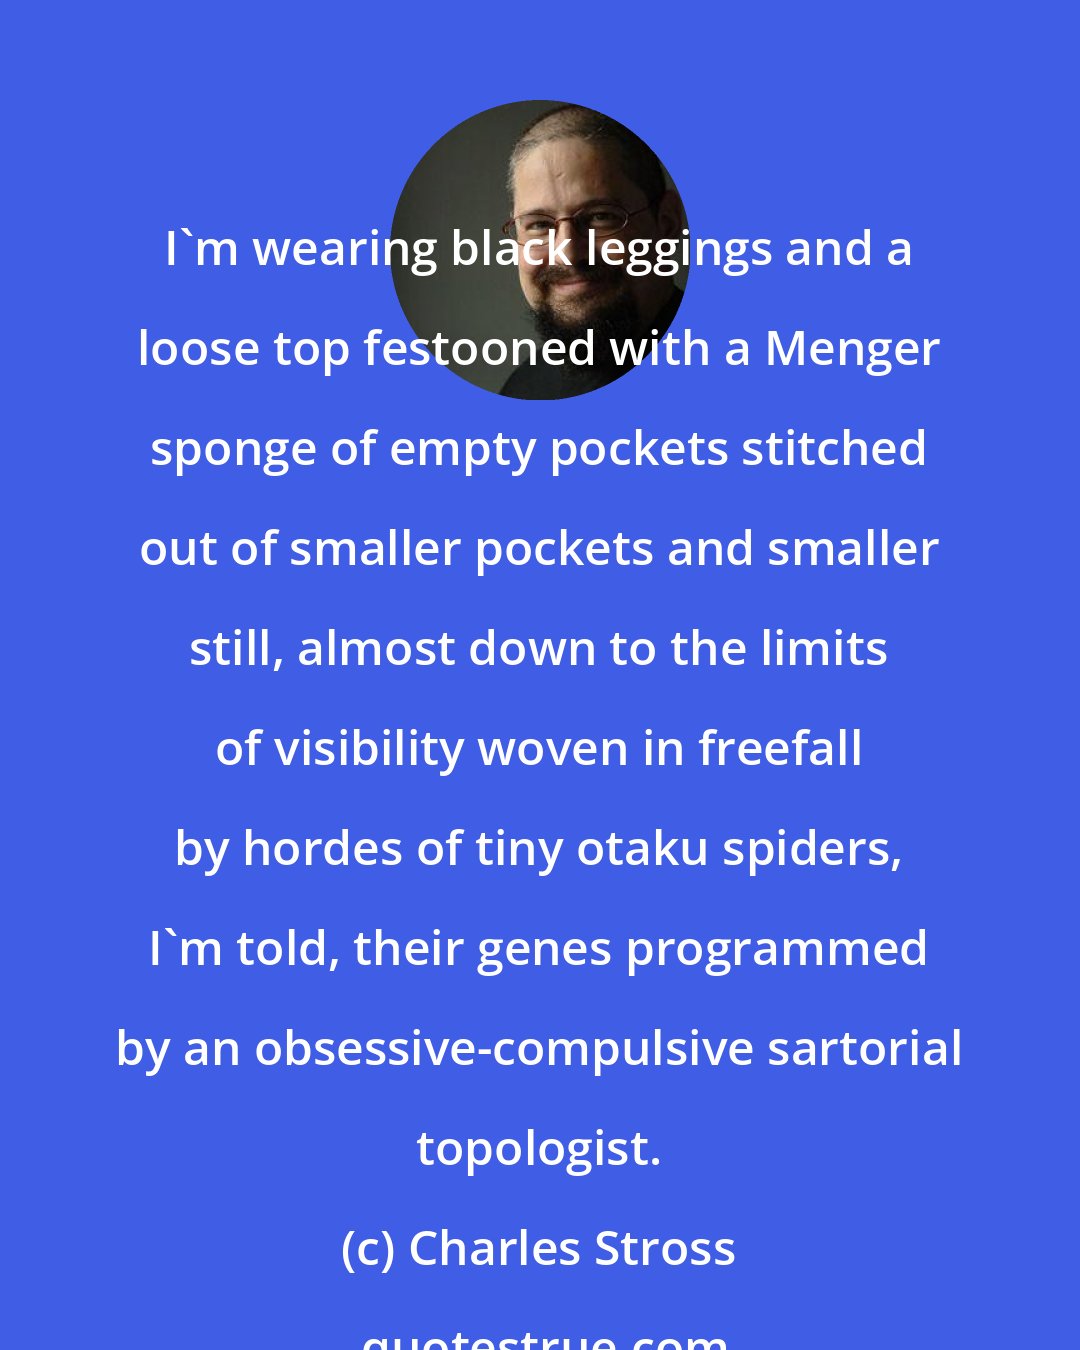 Charles Stross: I'm wearing black leggings and a loose top festooned with a Menger sponge of empty pockets stitched out of smaller pockets and smaller still, almost down to the limits of visibility woven in freefall by hordes of tiny otaku spiders, I'm told, their genes programmed by an obsessive-compulsive sartorial topologist.